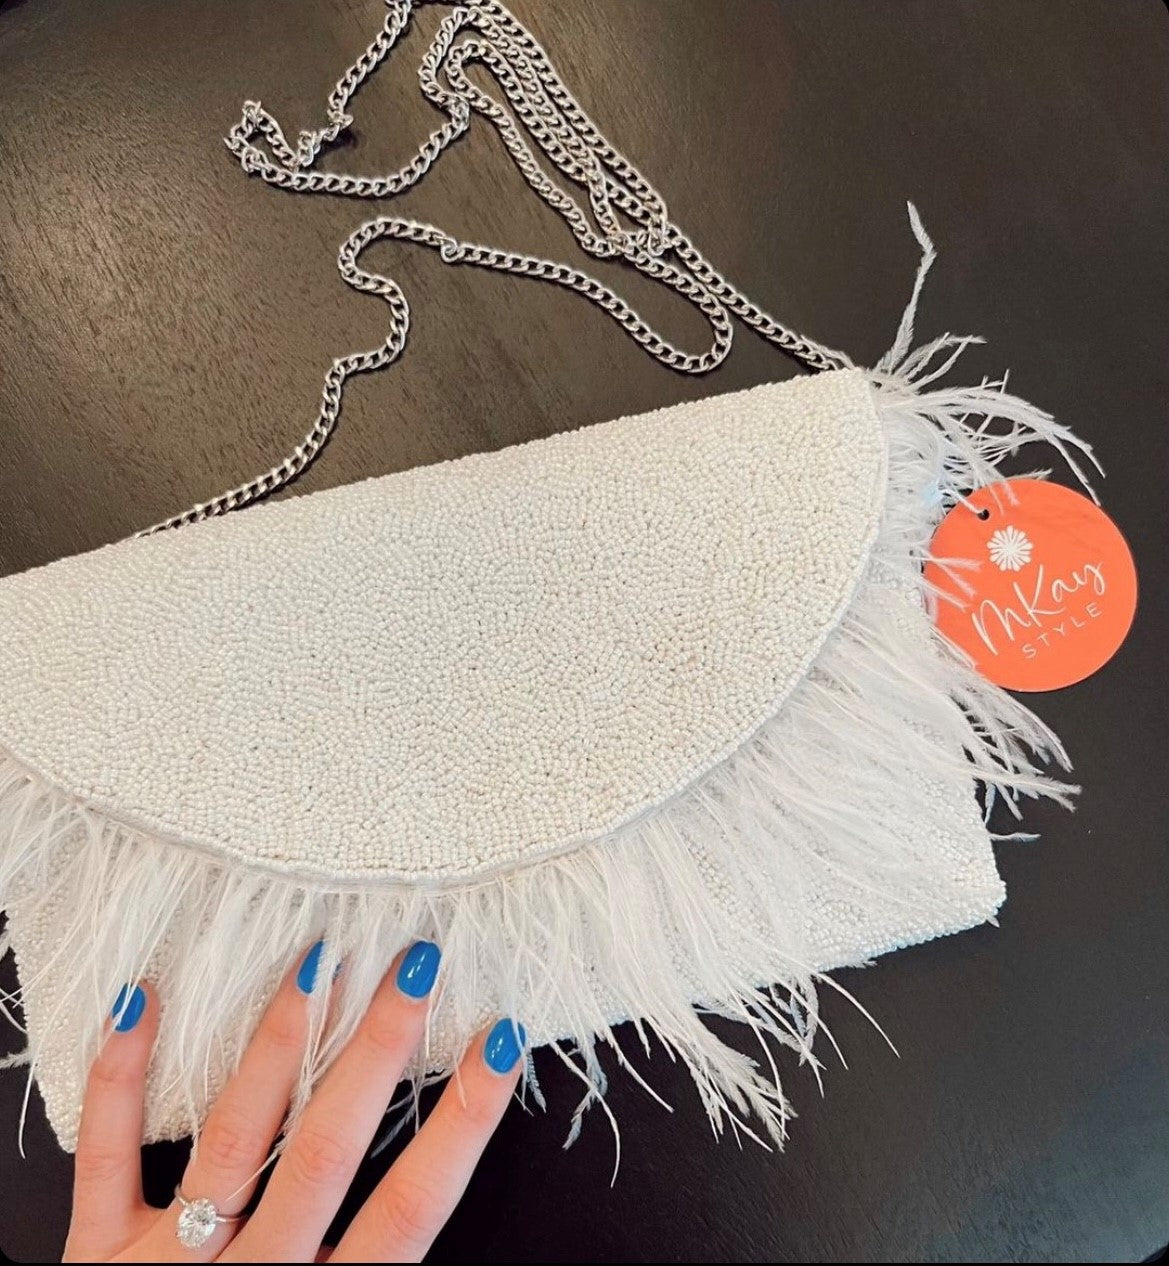 The White Beaded Party Clutch